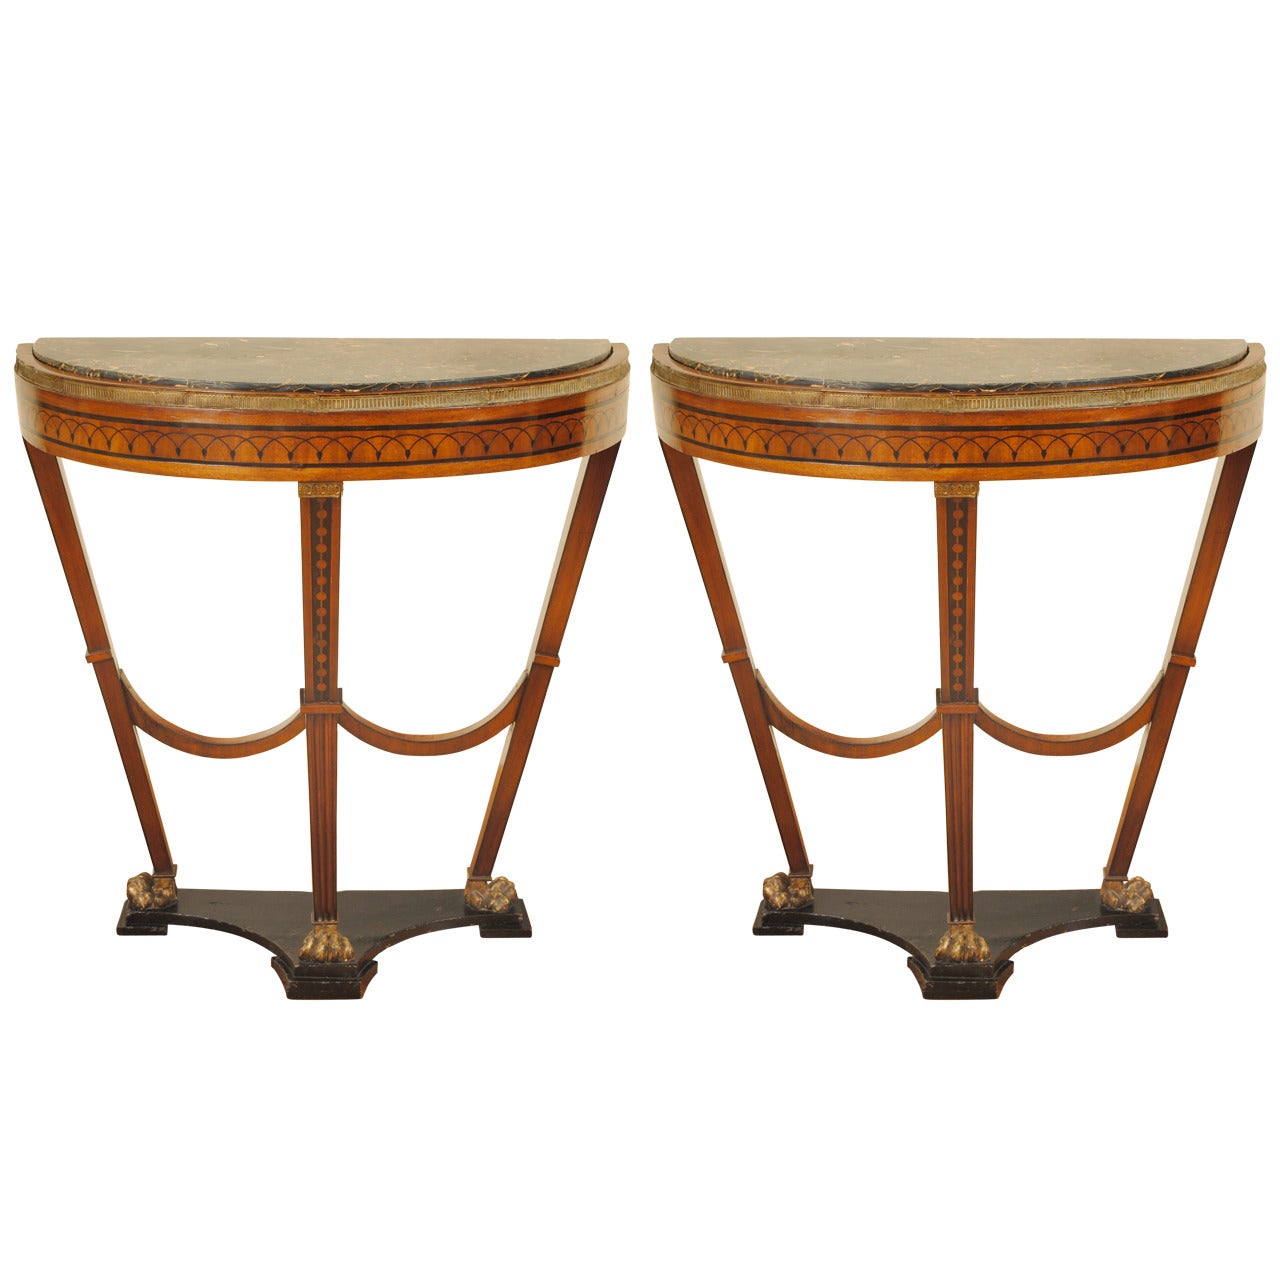 Pair of Continental, Possibly Baltic, Inlaid and Giltwood, Marble-Top Consoles